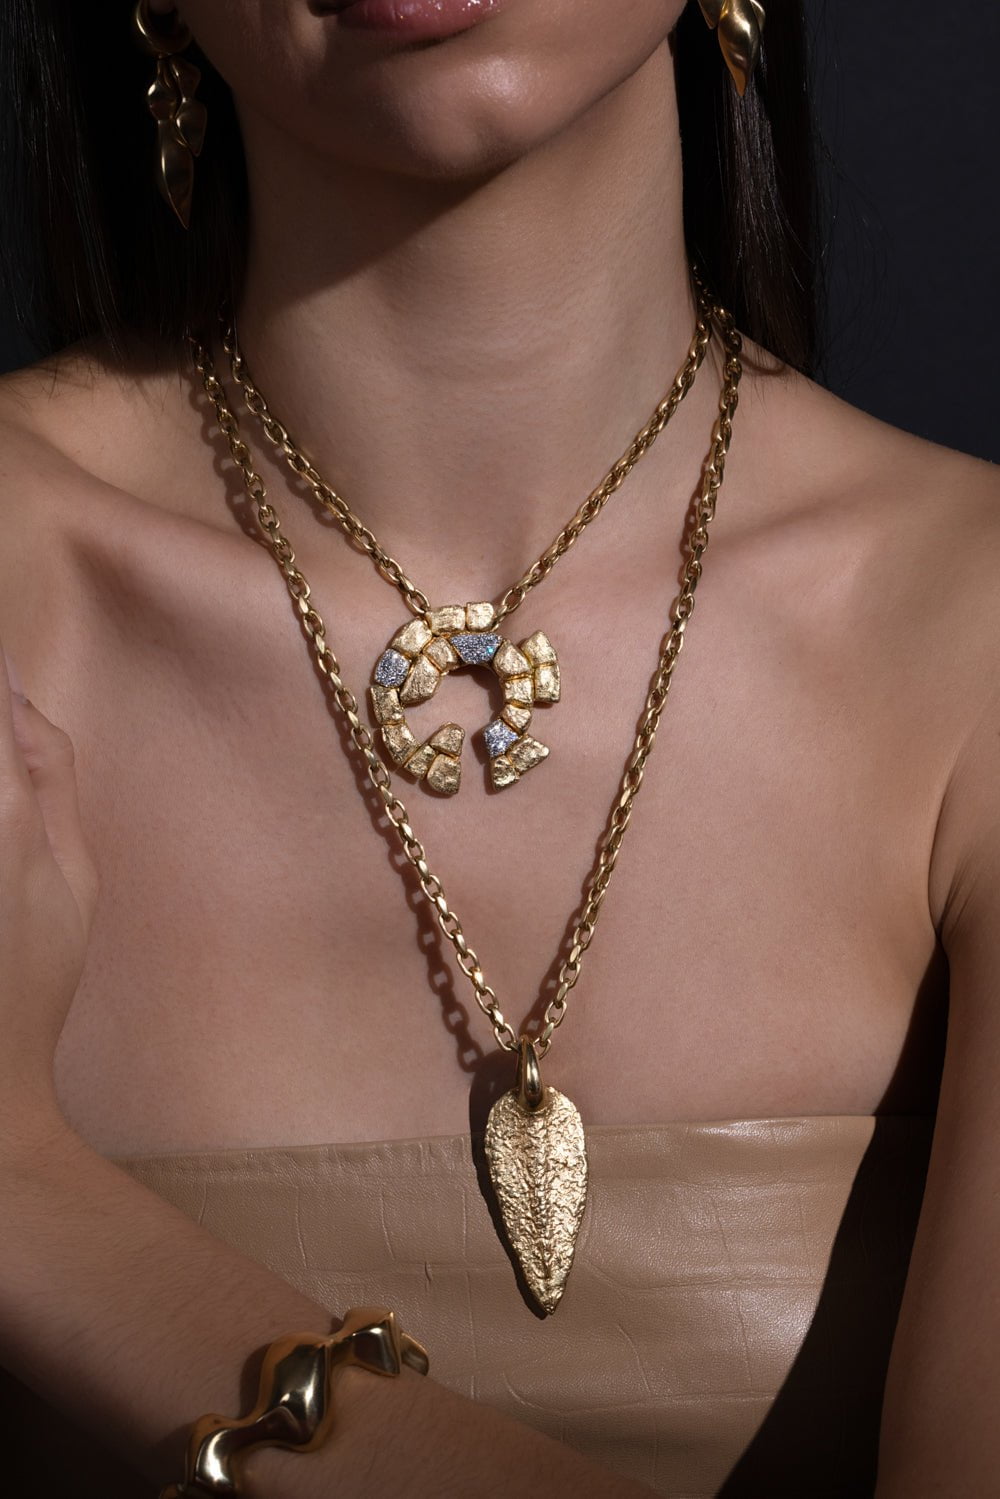 VRAM-Lynk Chain Necklace-YELLOW GOLD